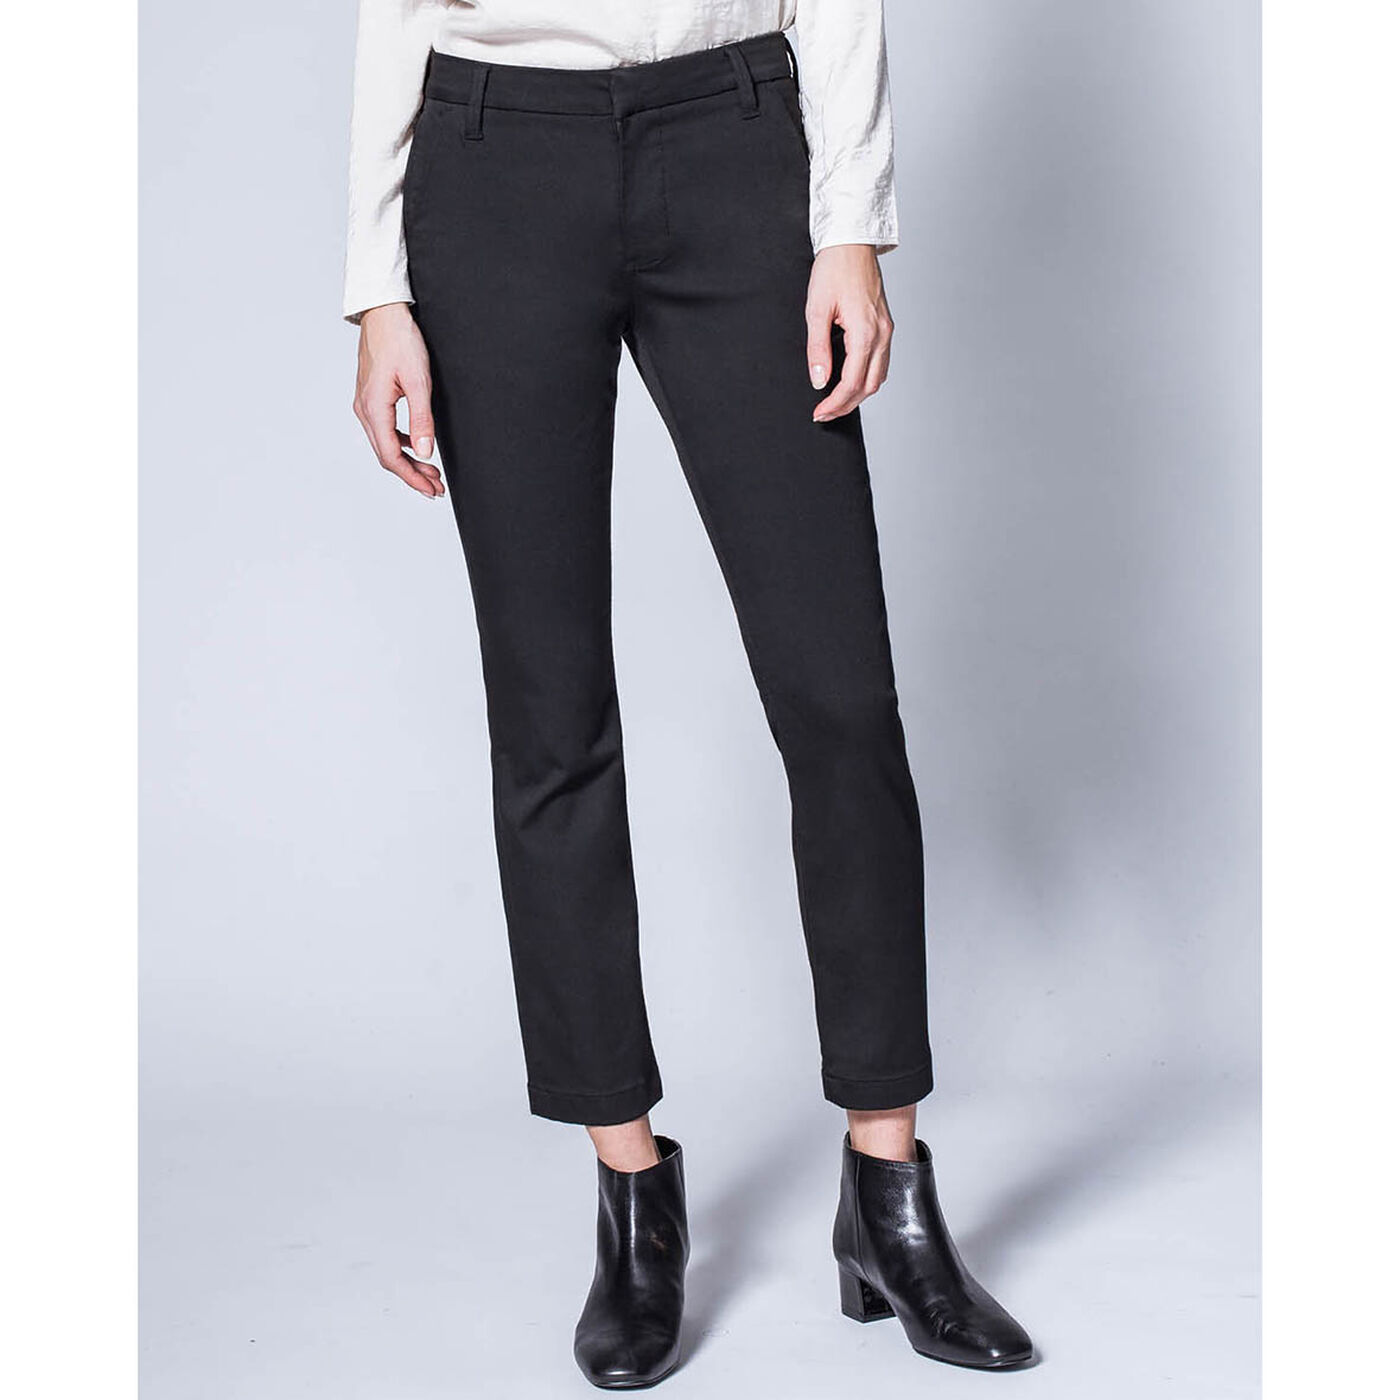 Women's Never Fade Trouser Pant | Sporting Life Online